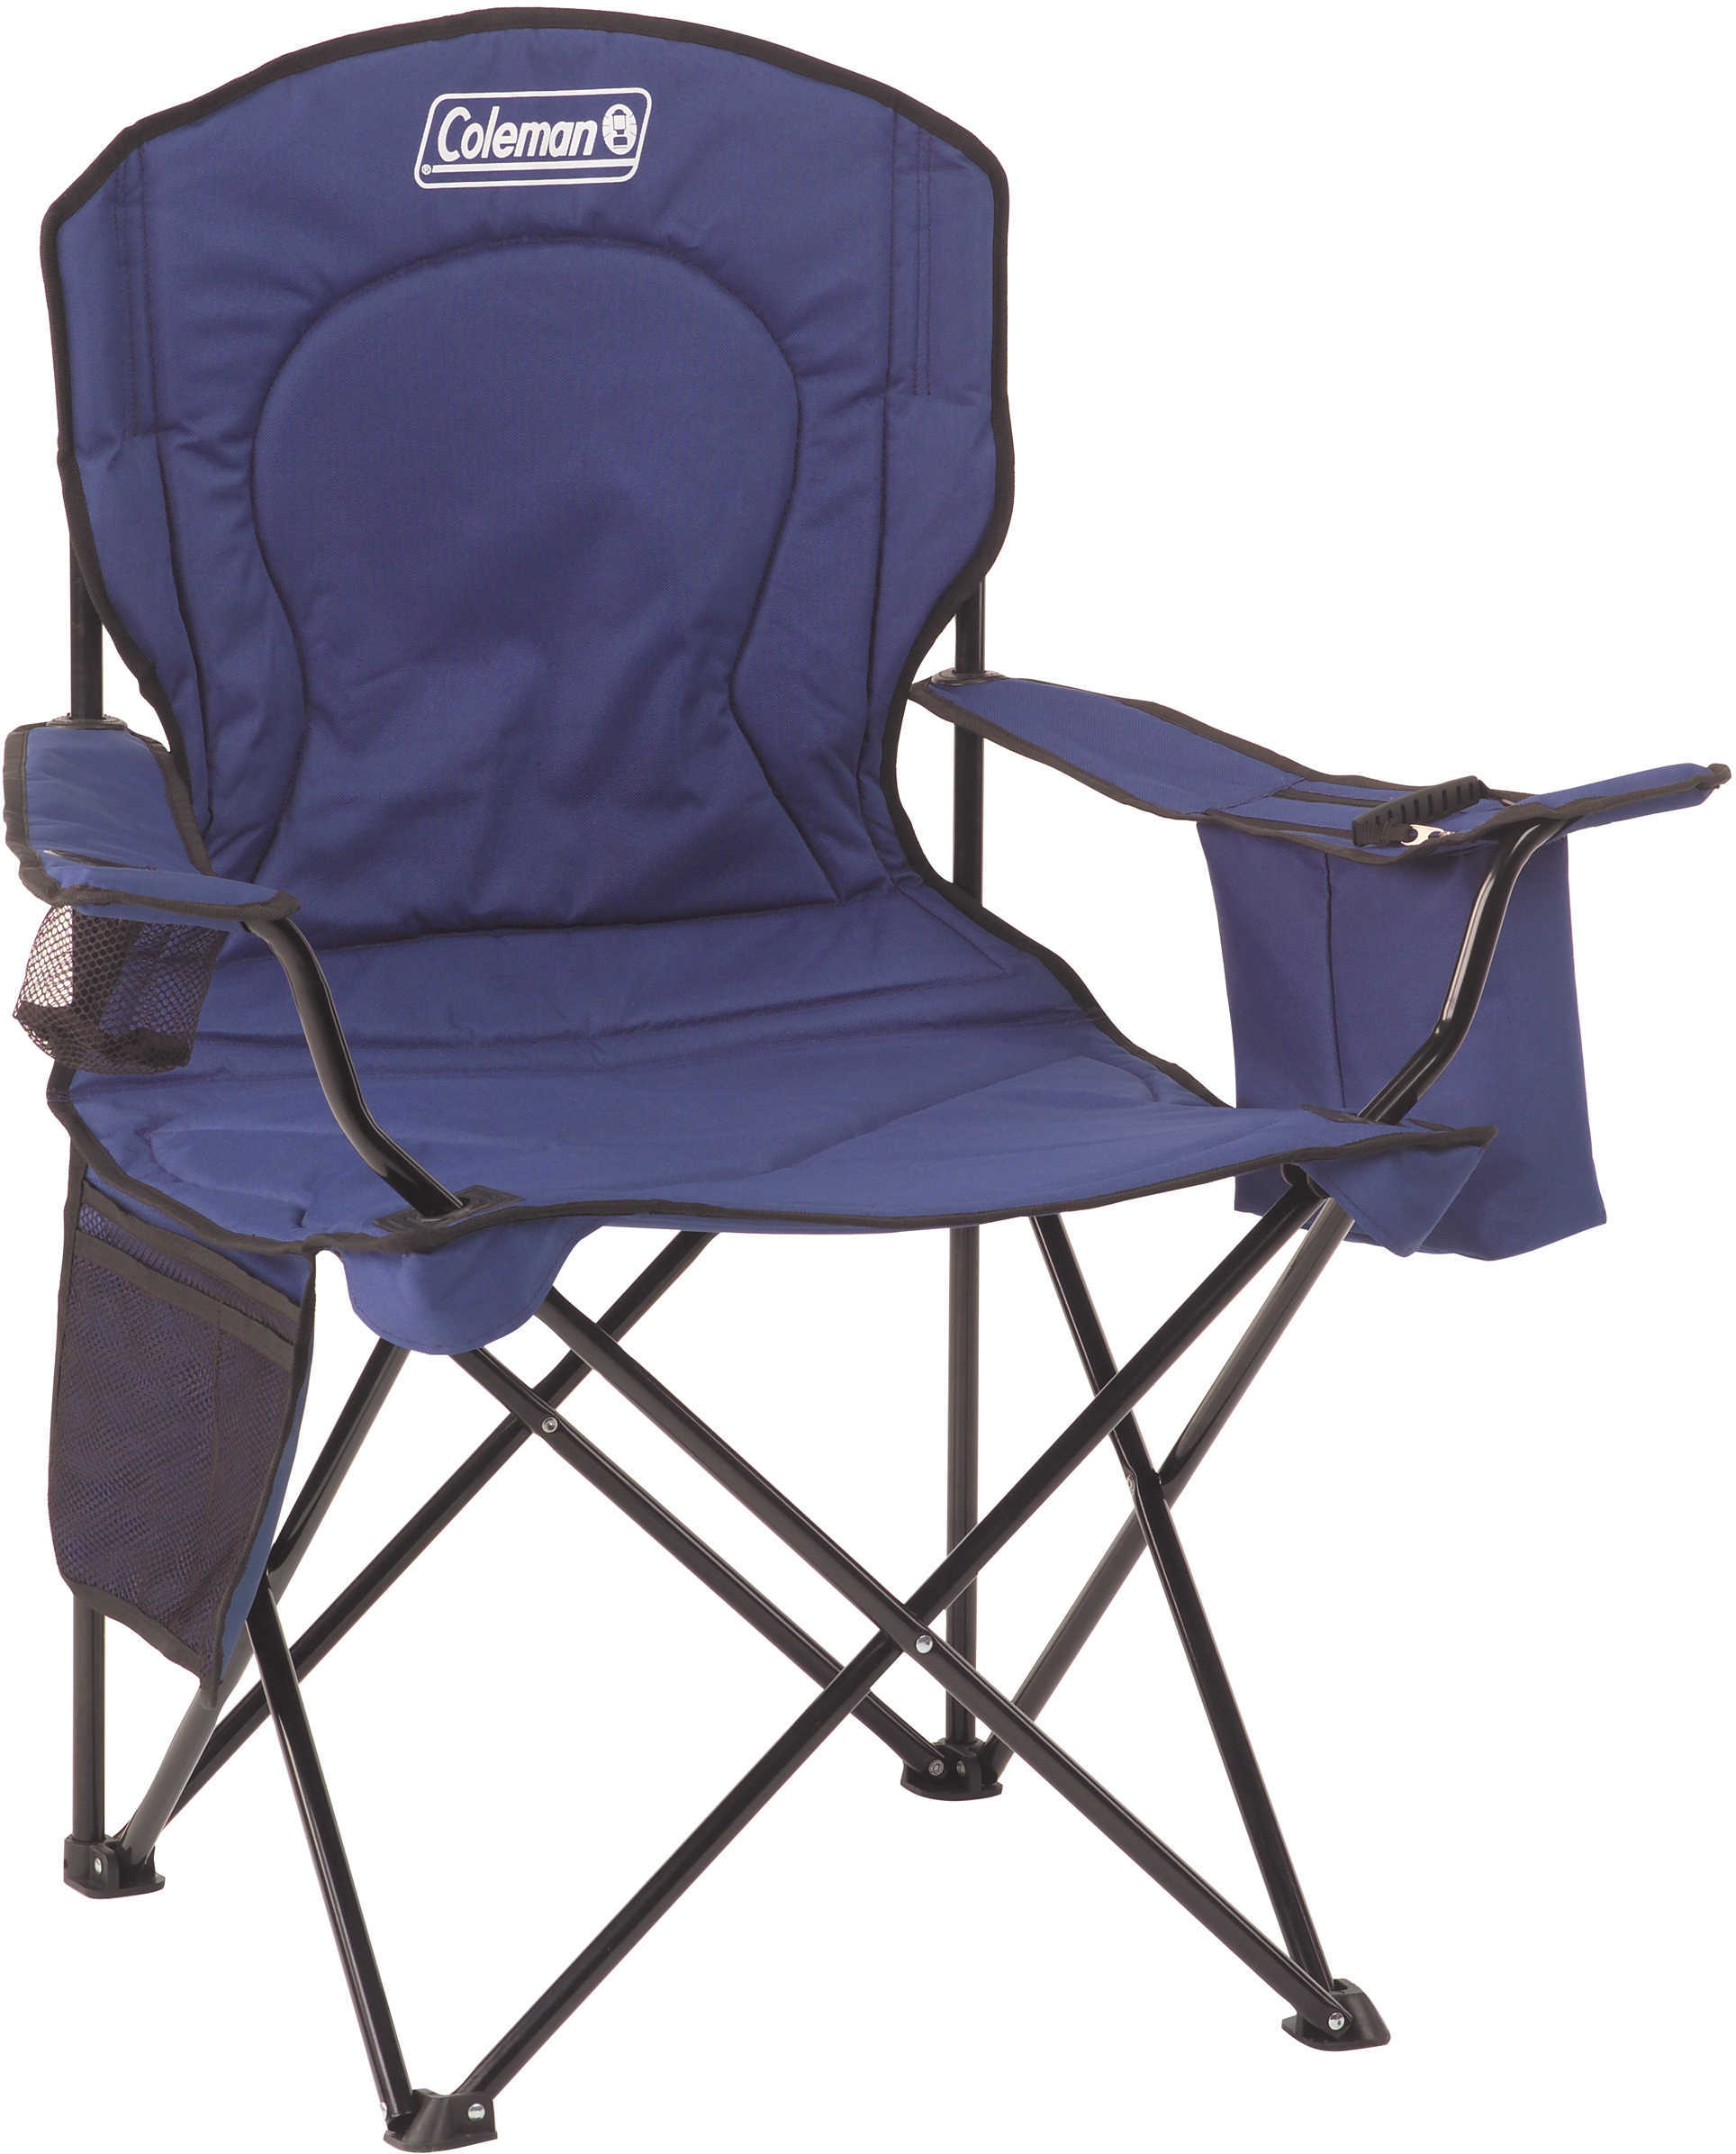 Coleman Chair Adult Quad With Cooler, Blue Md: 2000002188